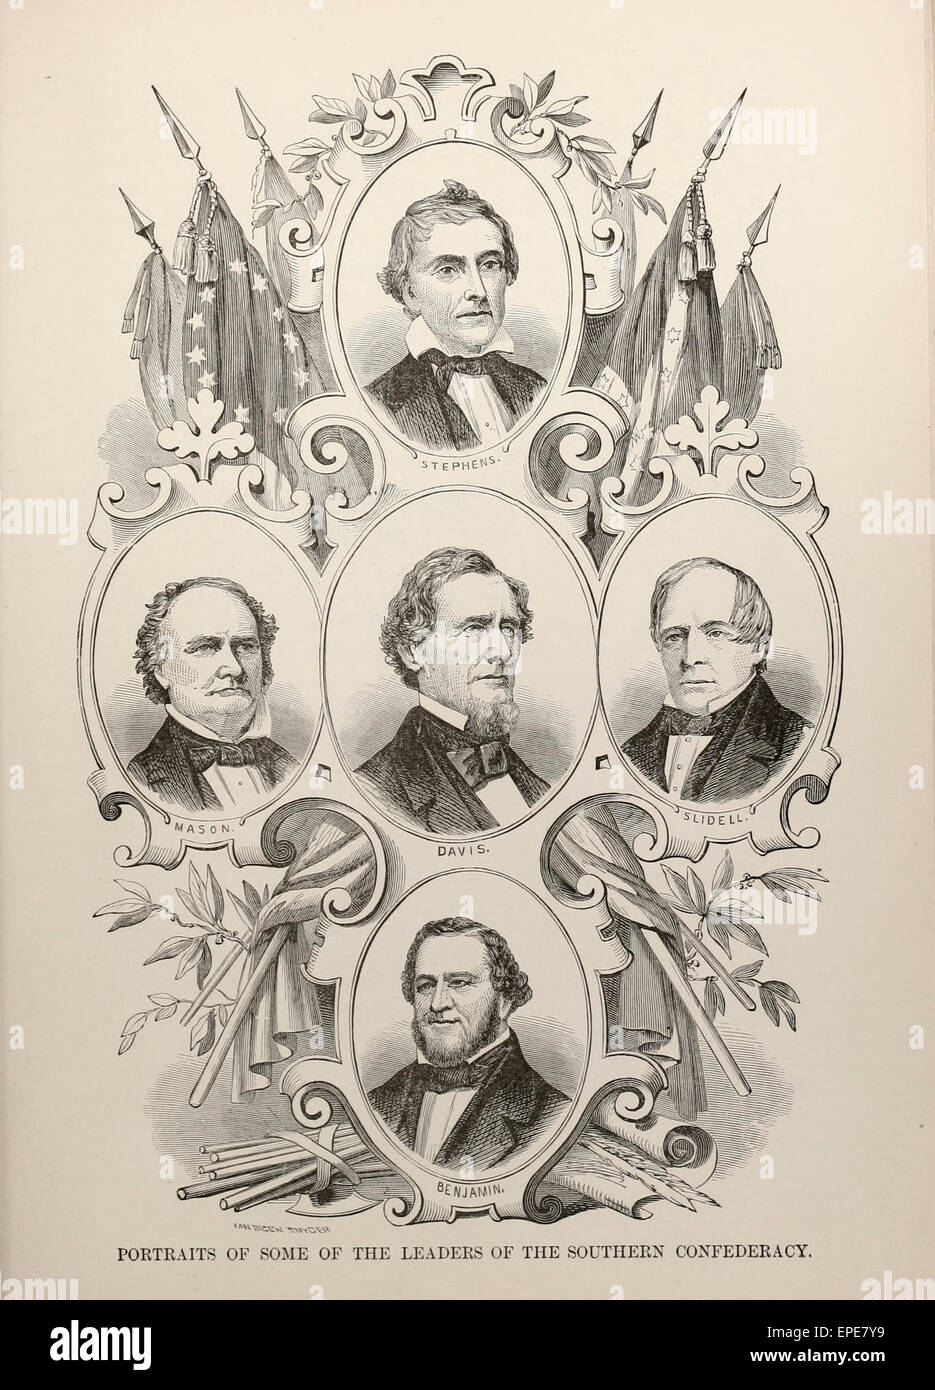 Portraits of some of the Leaders of the Southern Confederacy during the USA Civil War - Jefferson Davis, Alexander Stephens. Benjamin, Mason, Slidell Stock Photo